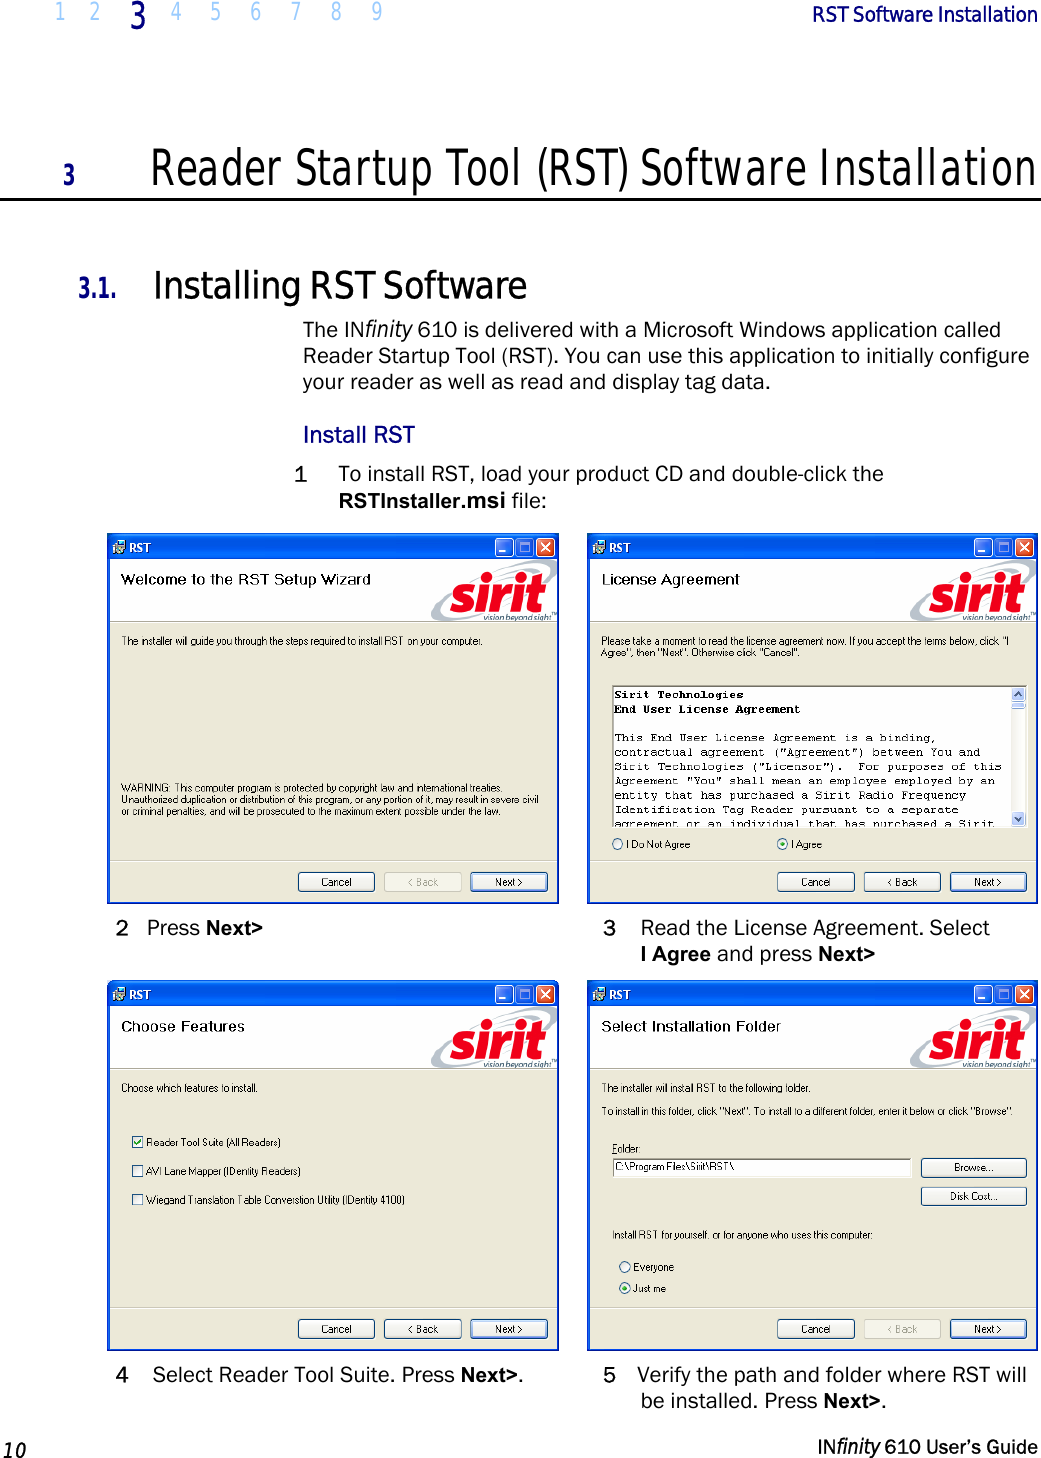  1 2  3  4 5 6 7 8 9        RST Software Installation   10   INfinity 610 User’s Guide  3 Reader Startup Tool (RST) Software Installation  3.1. Installing RST Software The INfinity 610 is delivered with a Microsoft Windows application called Reader Startup Tool (RST). You can use this application to initially configure your reader as well as read and display tag data.  Install RST 1 To install RST, load your product CD and double-click the RSTInstaller.msi file:    2 Press Next&gt; 3  Read the License Agreement. Select  I Agree and press Next&gt;    4  Select Reader Tool Suite. Press Next&gt;.  5  Verify the path and folder where RST will be installed. Press Next&gt;. 